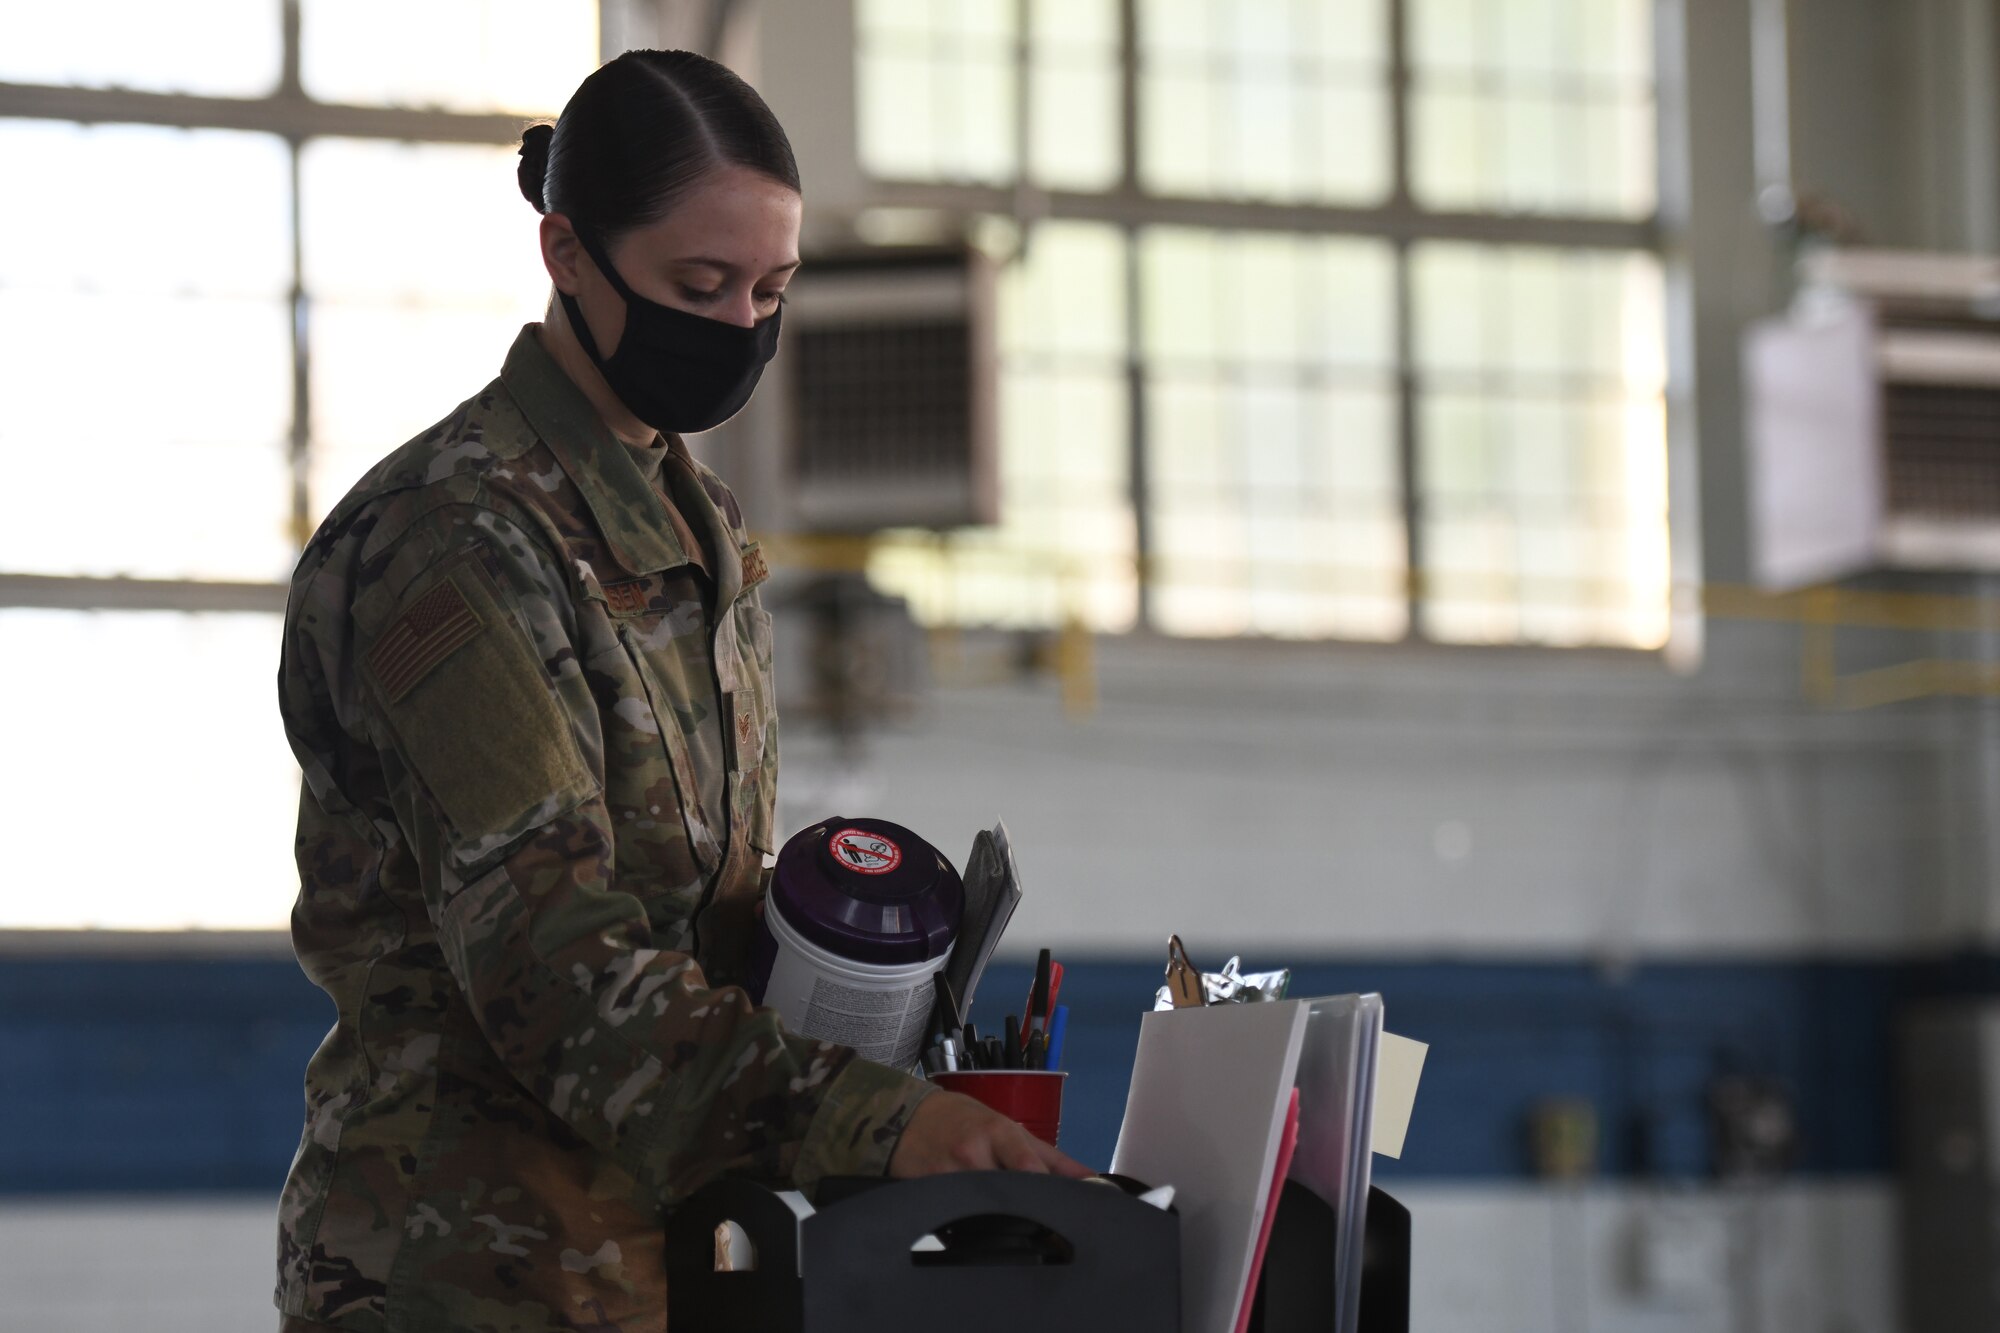 U.S. Air Force Staff Sergeant Amber Hansen, 42nd Medical Group Medical Materialist, collects medical supplies for relocation at Maxwell Air Force Base, Alabama, May 7, 2021. The current COVID-19 vaccination site is moving from Maxwell’s Honor Guard hanger to the Immunizations Clinic.